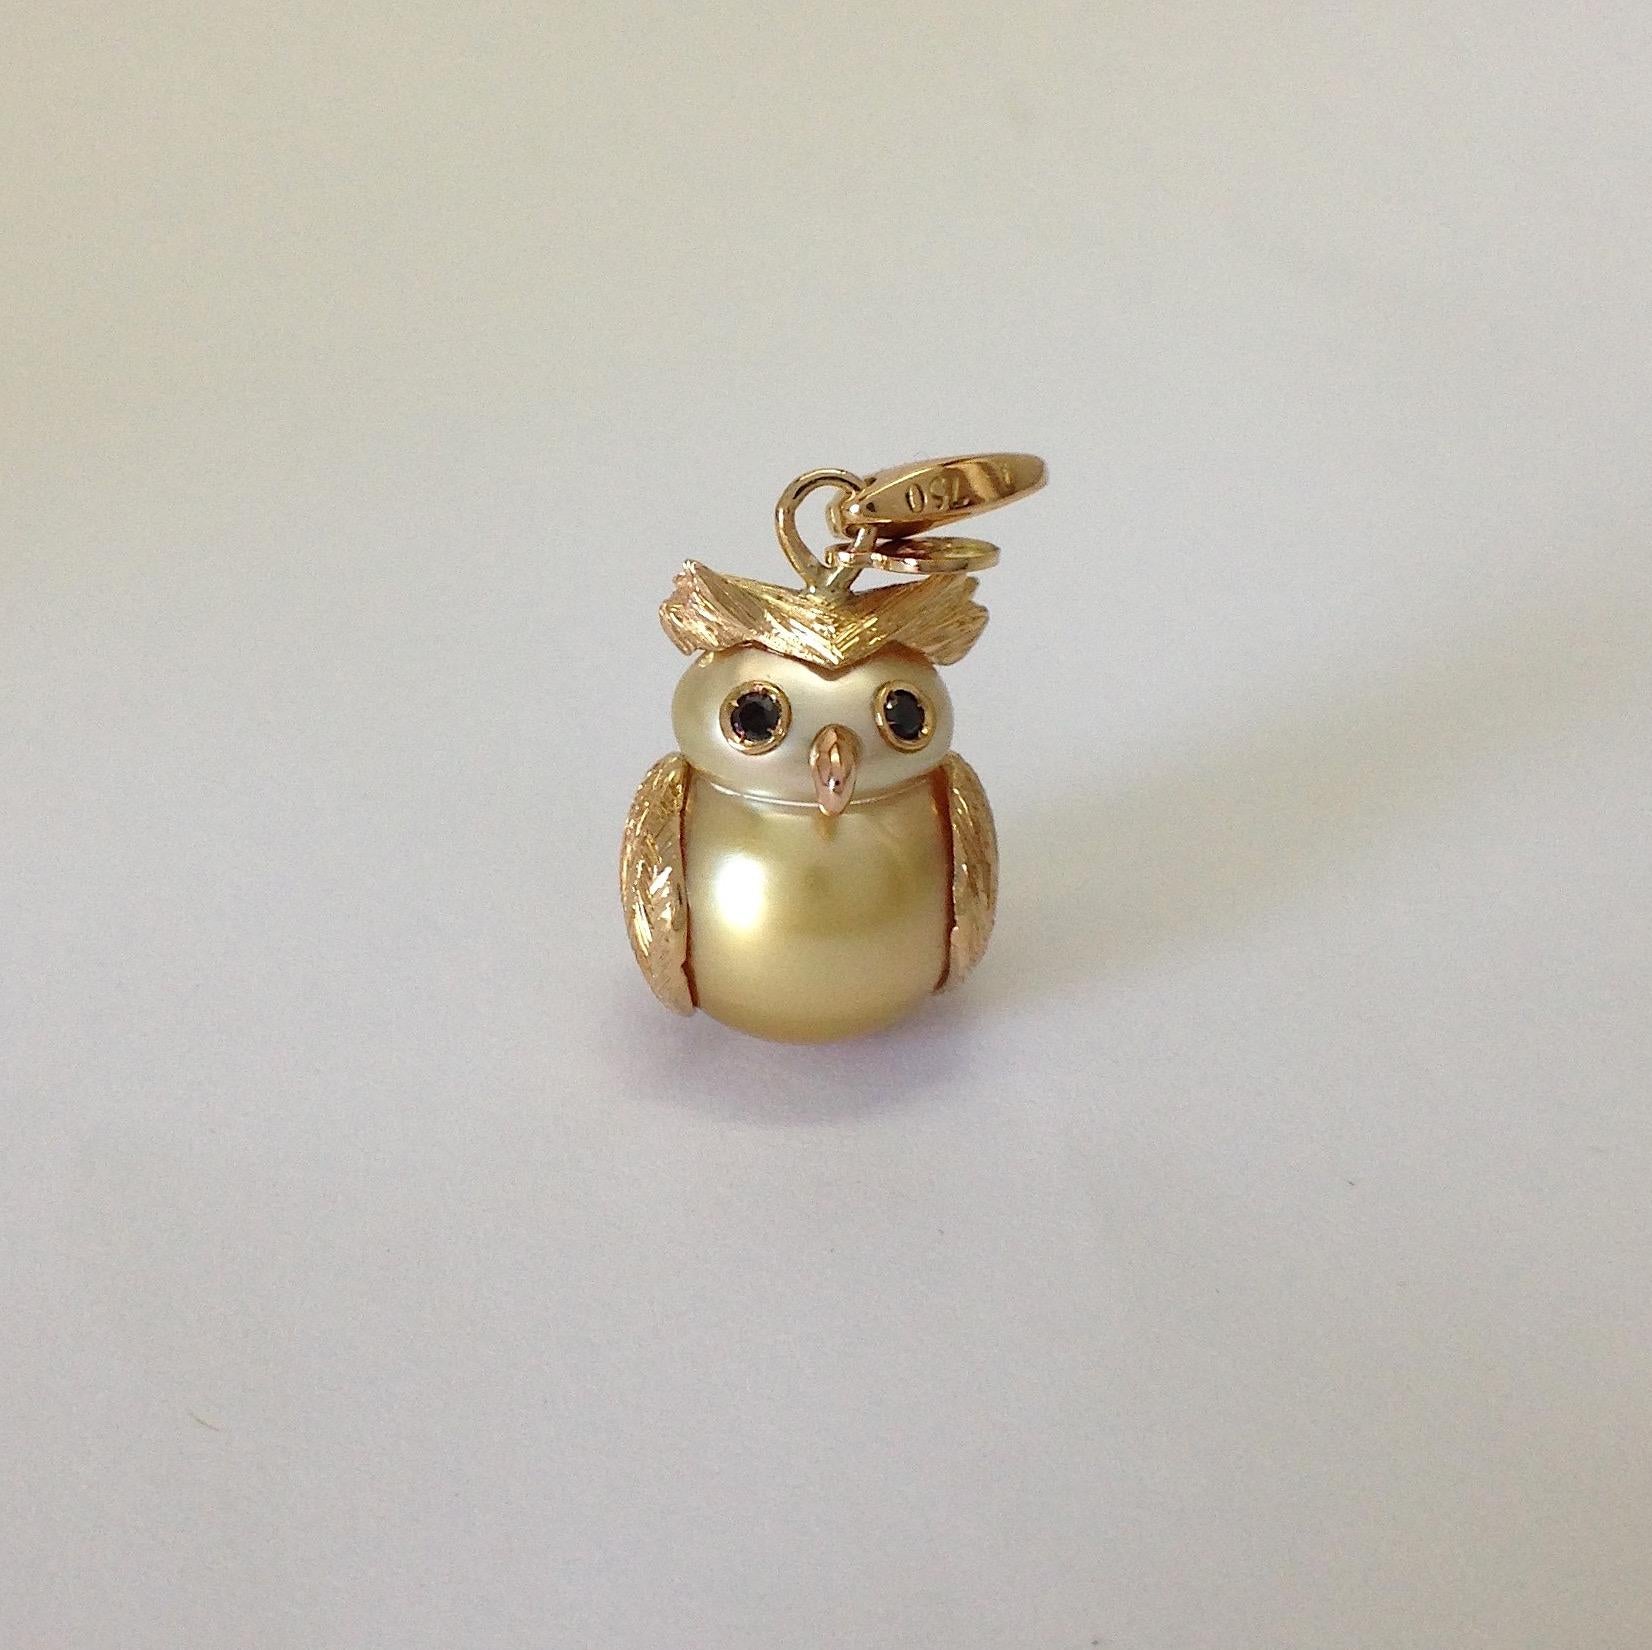 Owl Diamond 18 Karat Gold Australian Pearl Charm or Pendant Necklace Made in Italy
The charm is inspired by my love of wild animals and nature, looking at this rare and really beautiful Australian pearl I immediately saw an owl.
Its beak is in red